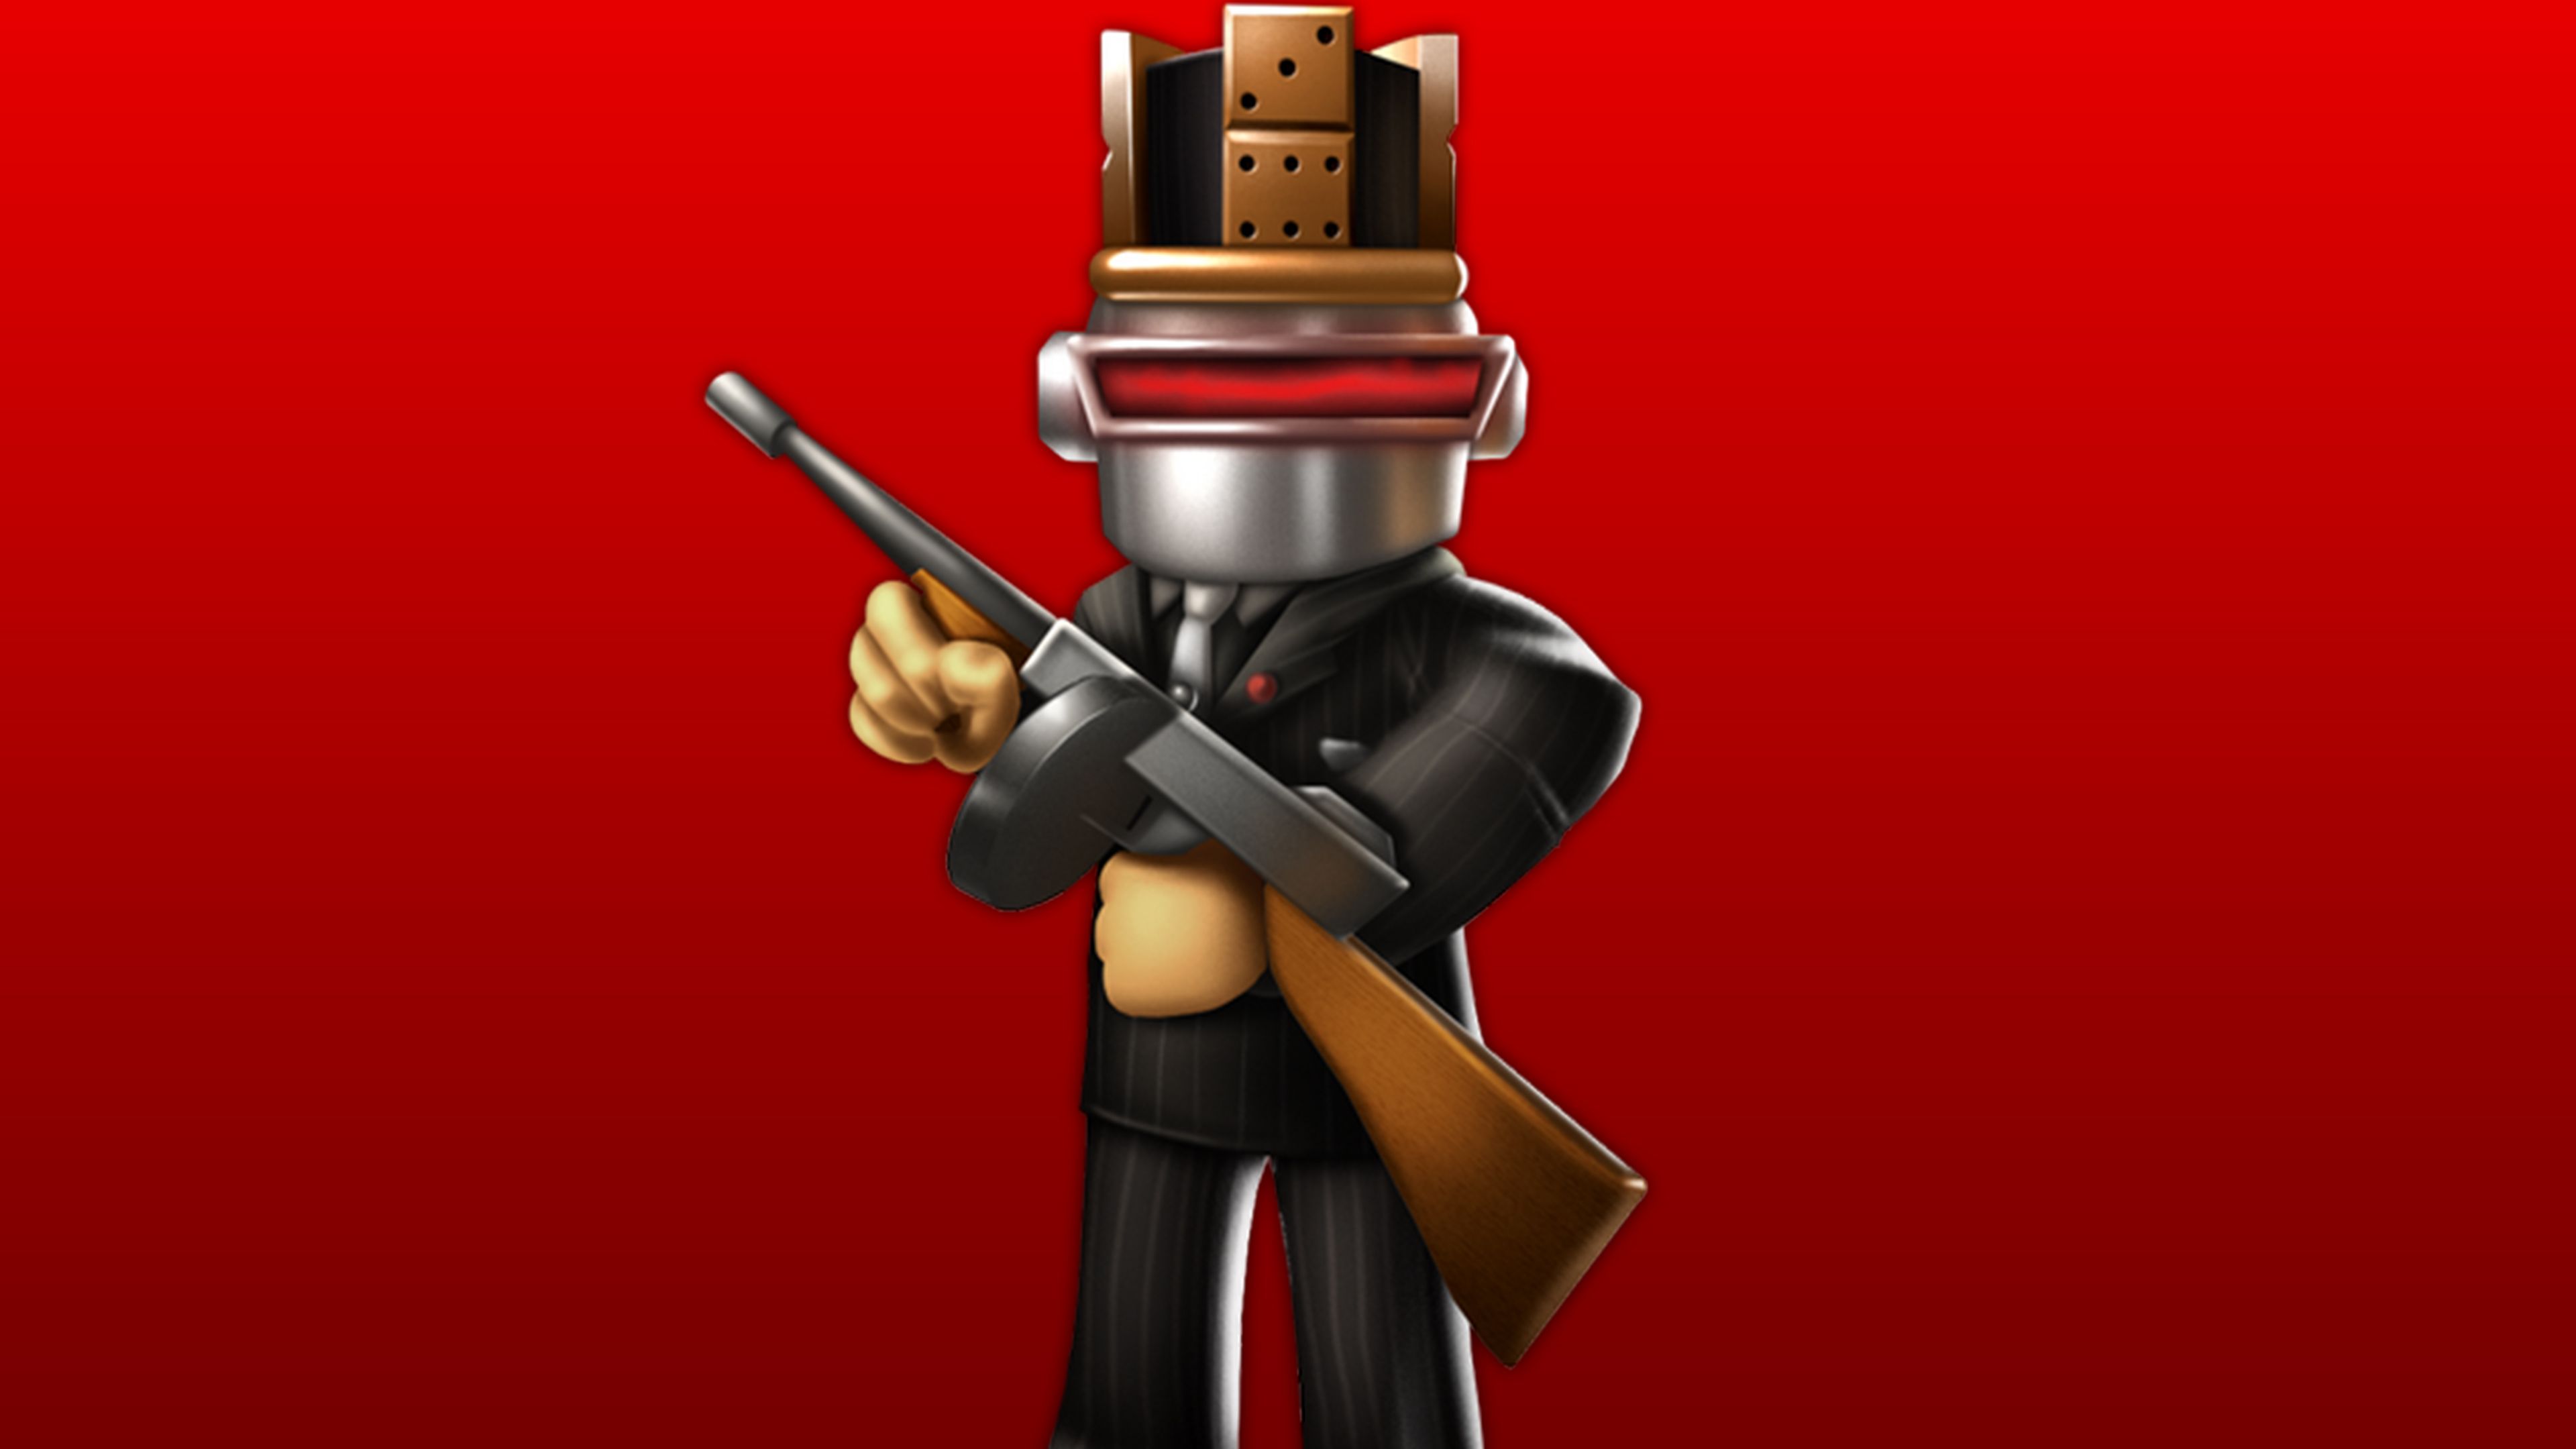 Cool Roblox Wallpapers for Desktop Free Download 